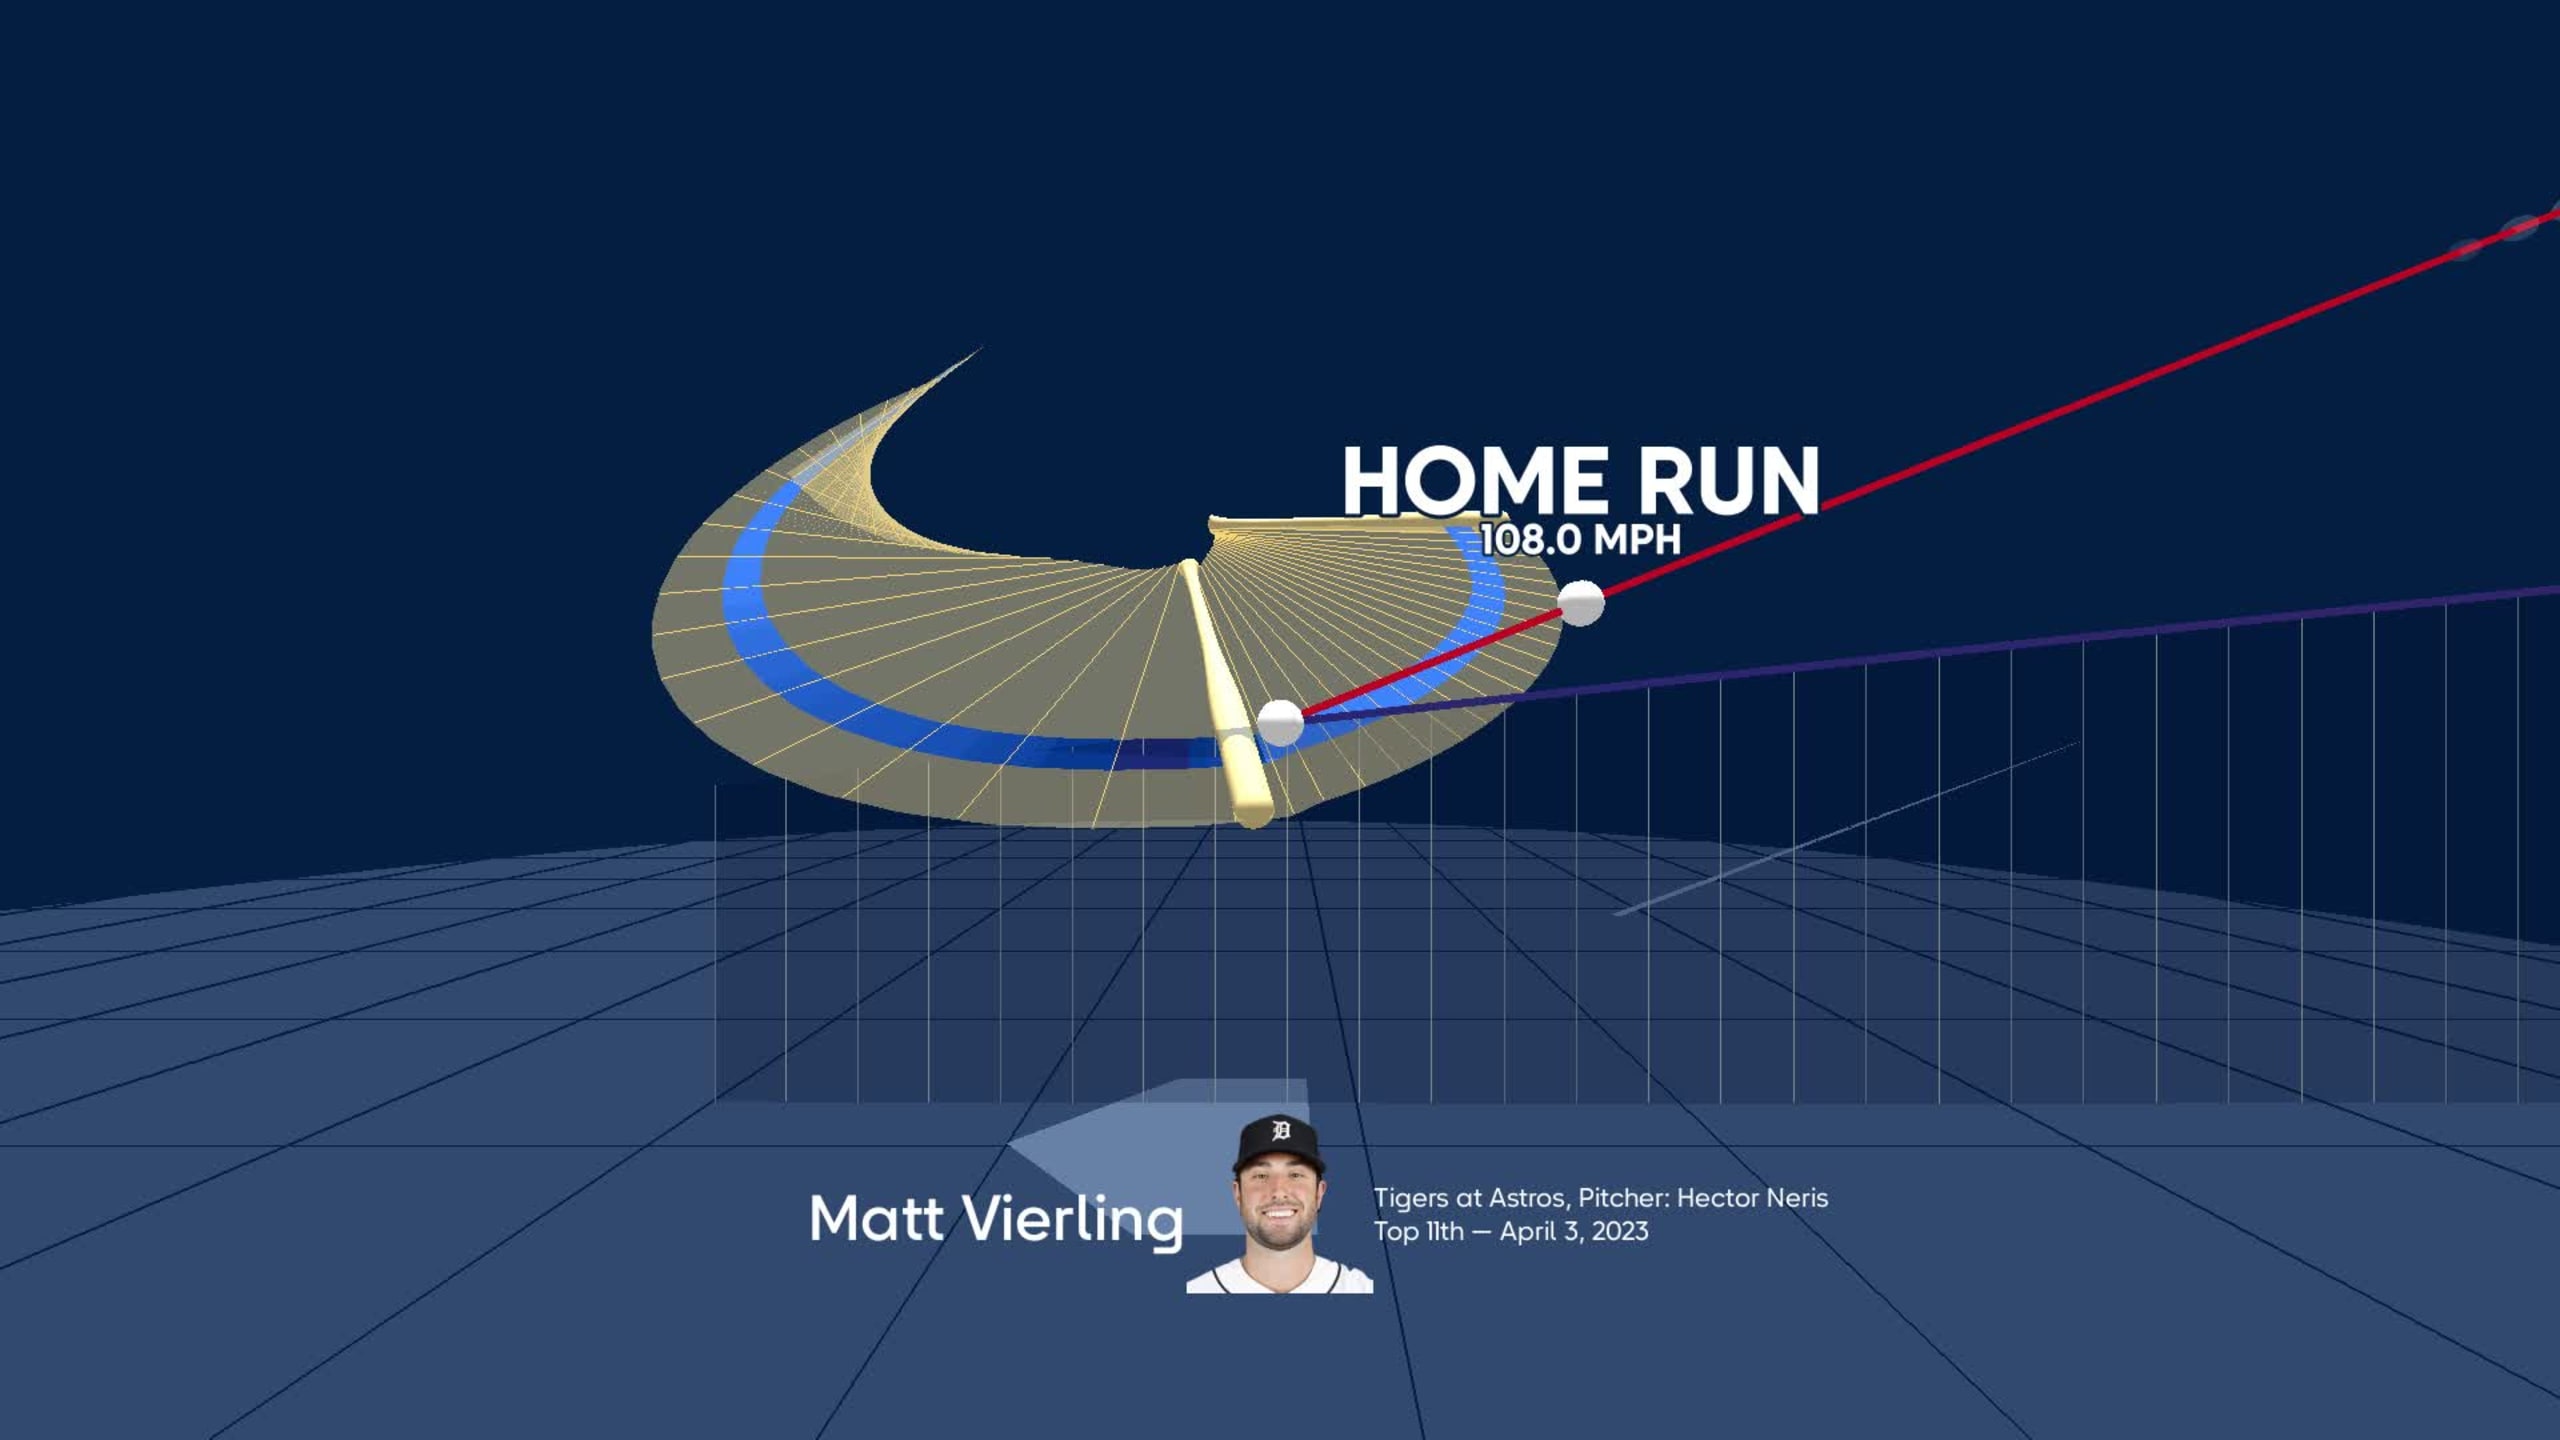 Matt Vierling - MLB Right field - News, Stats, Bio and more - The Athletic